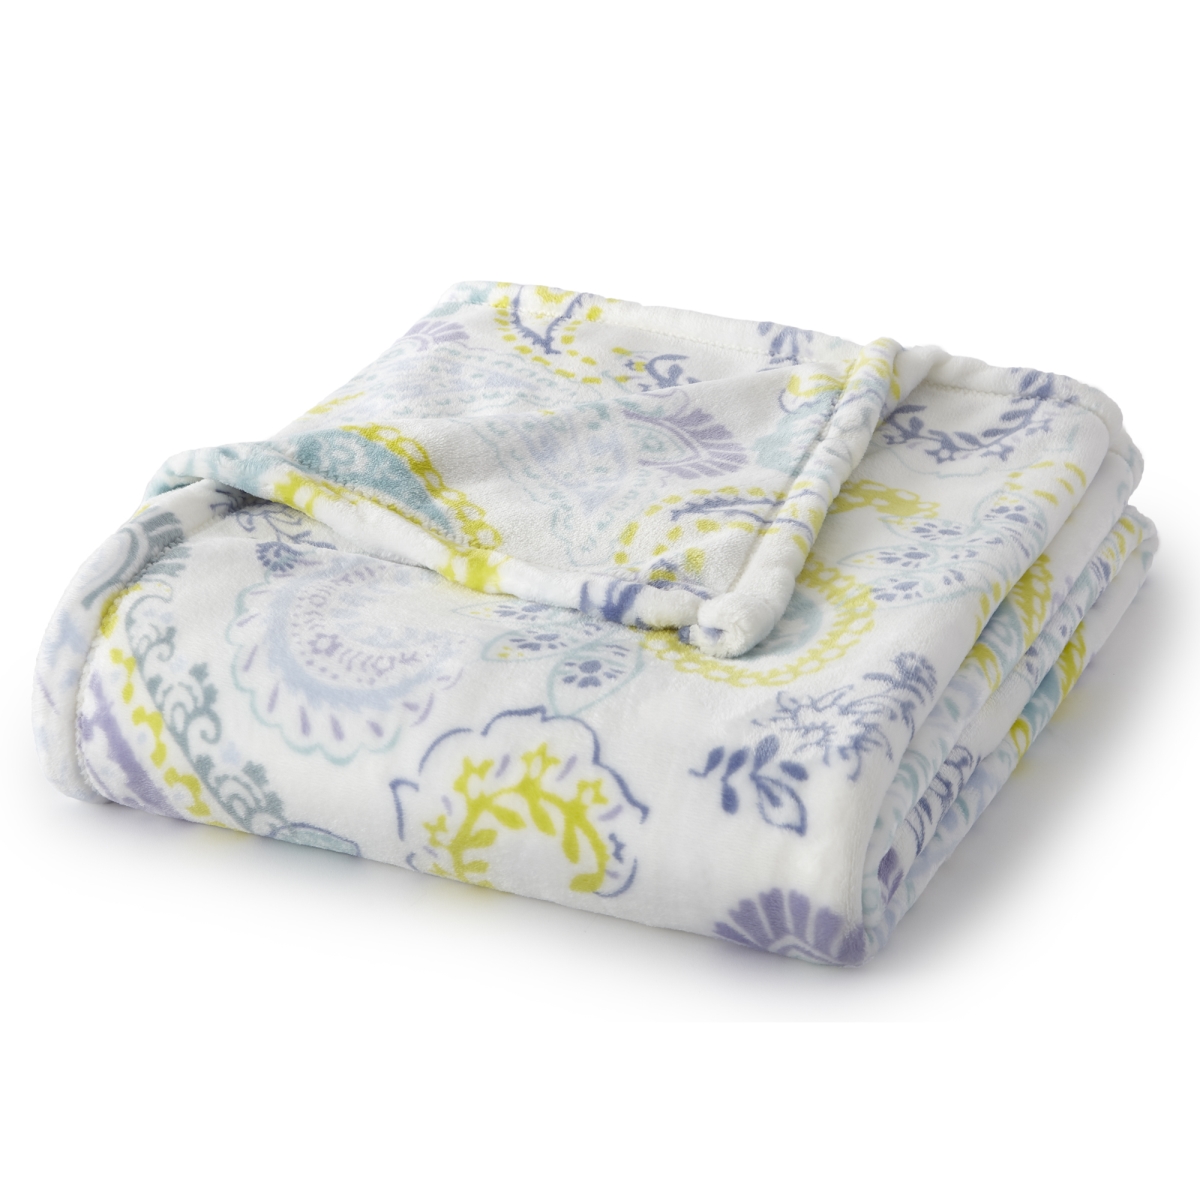 T1111068-mm-f165 60 X 70 In. Pastel Paisley Novelty Printed Velvet Plush Throw, Blue & Yellow